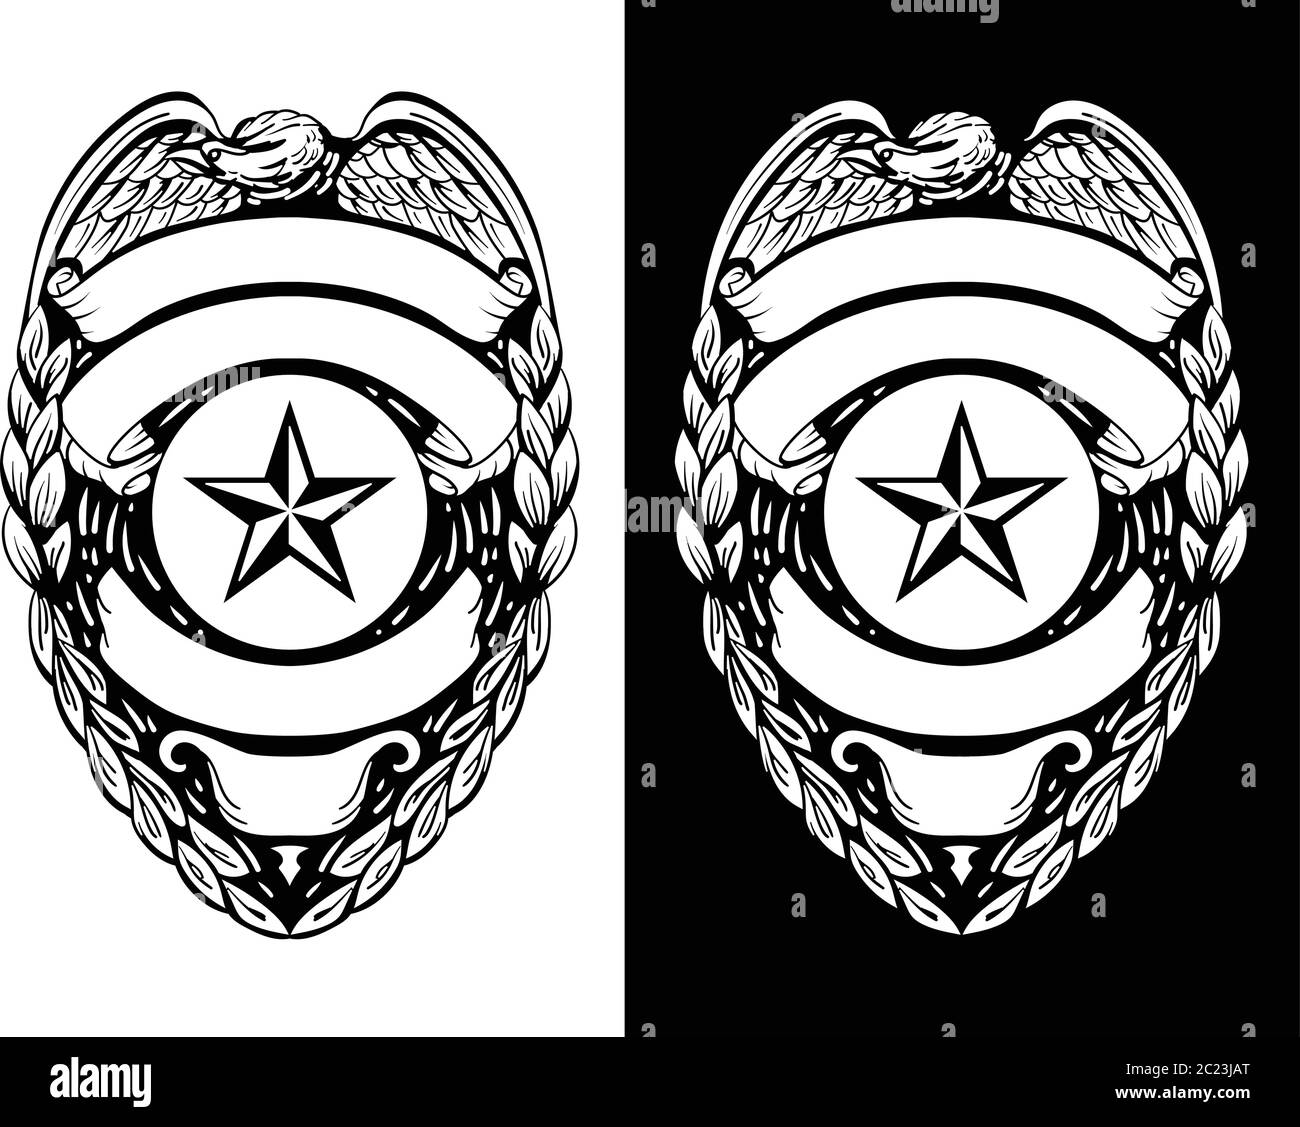 Police, Sheriff,  Law Enforcement Badge Isolated Vector Illustration in both Black Line Art and White Versions Stock Vector